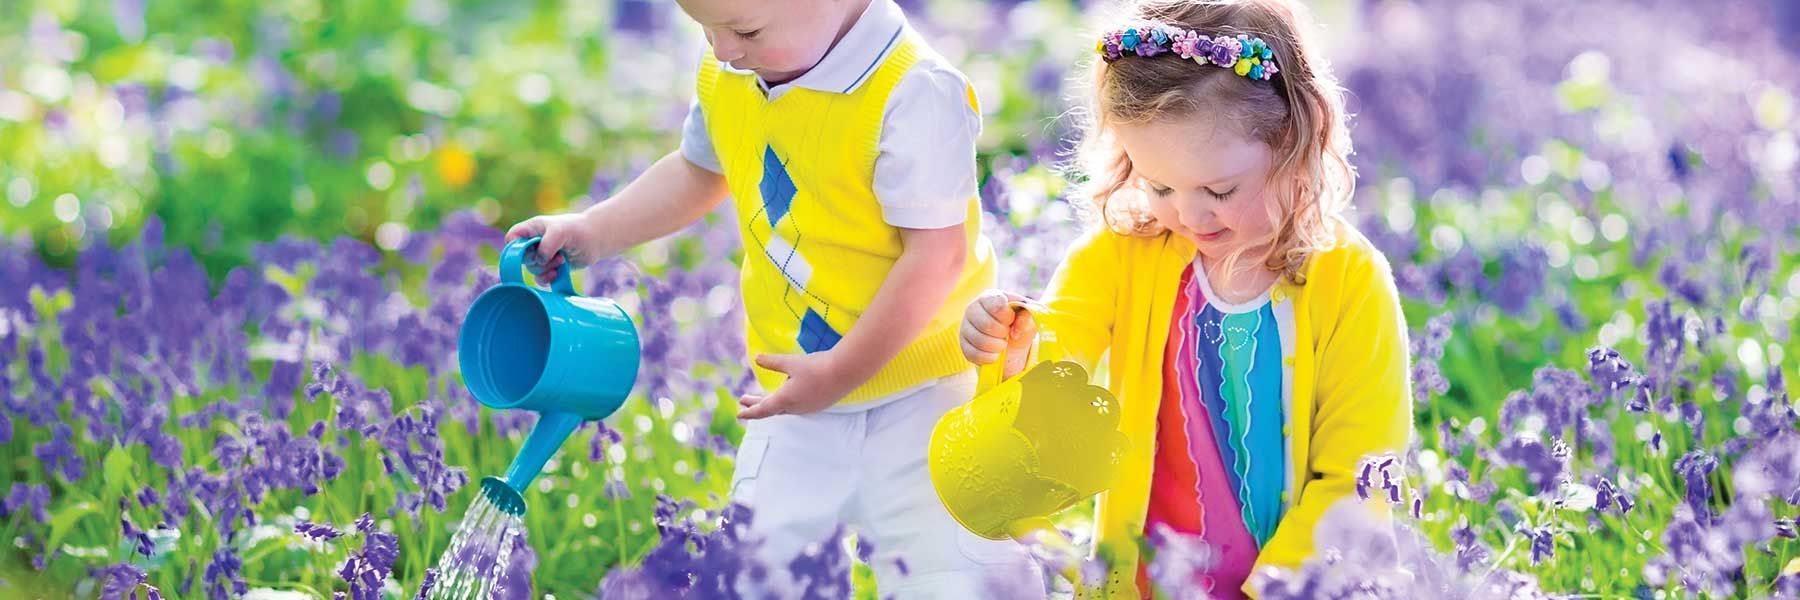 Five Fun Spring Yard and Garden Prep Tasks to Get the Kids Outside